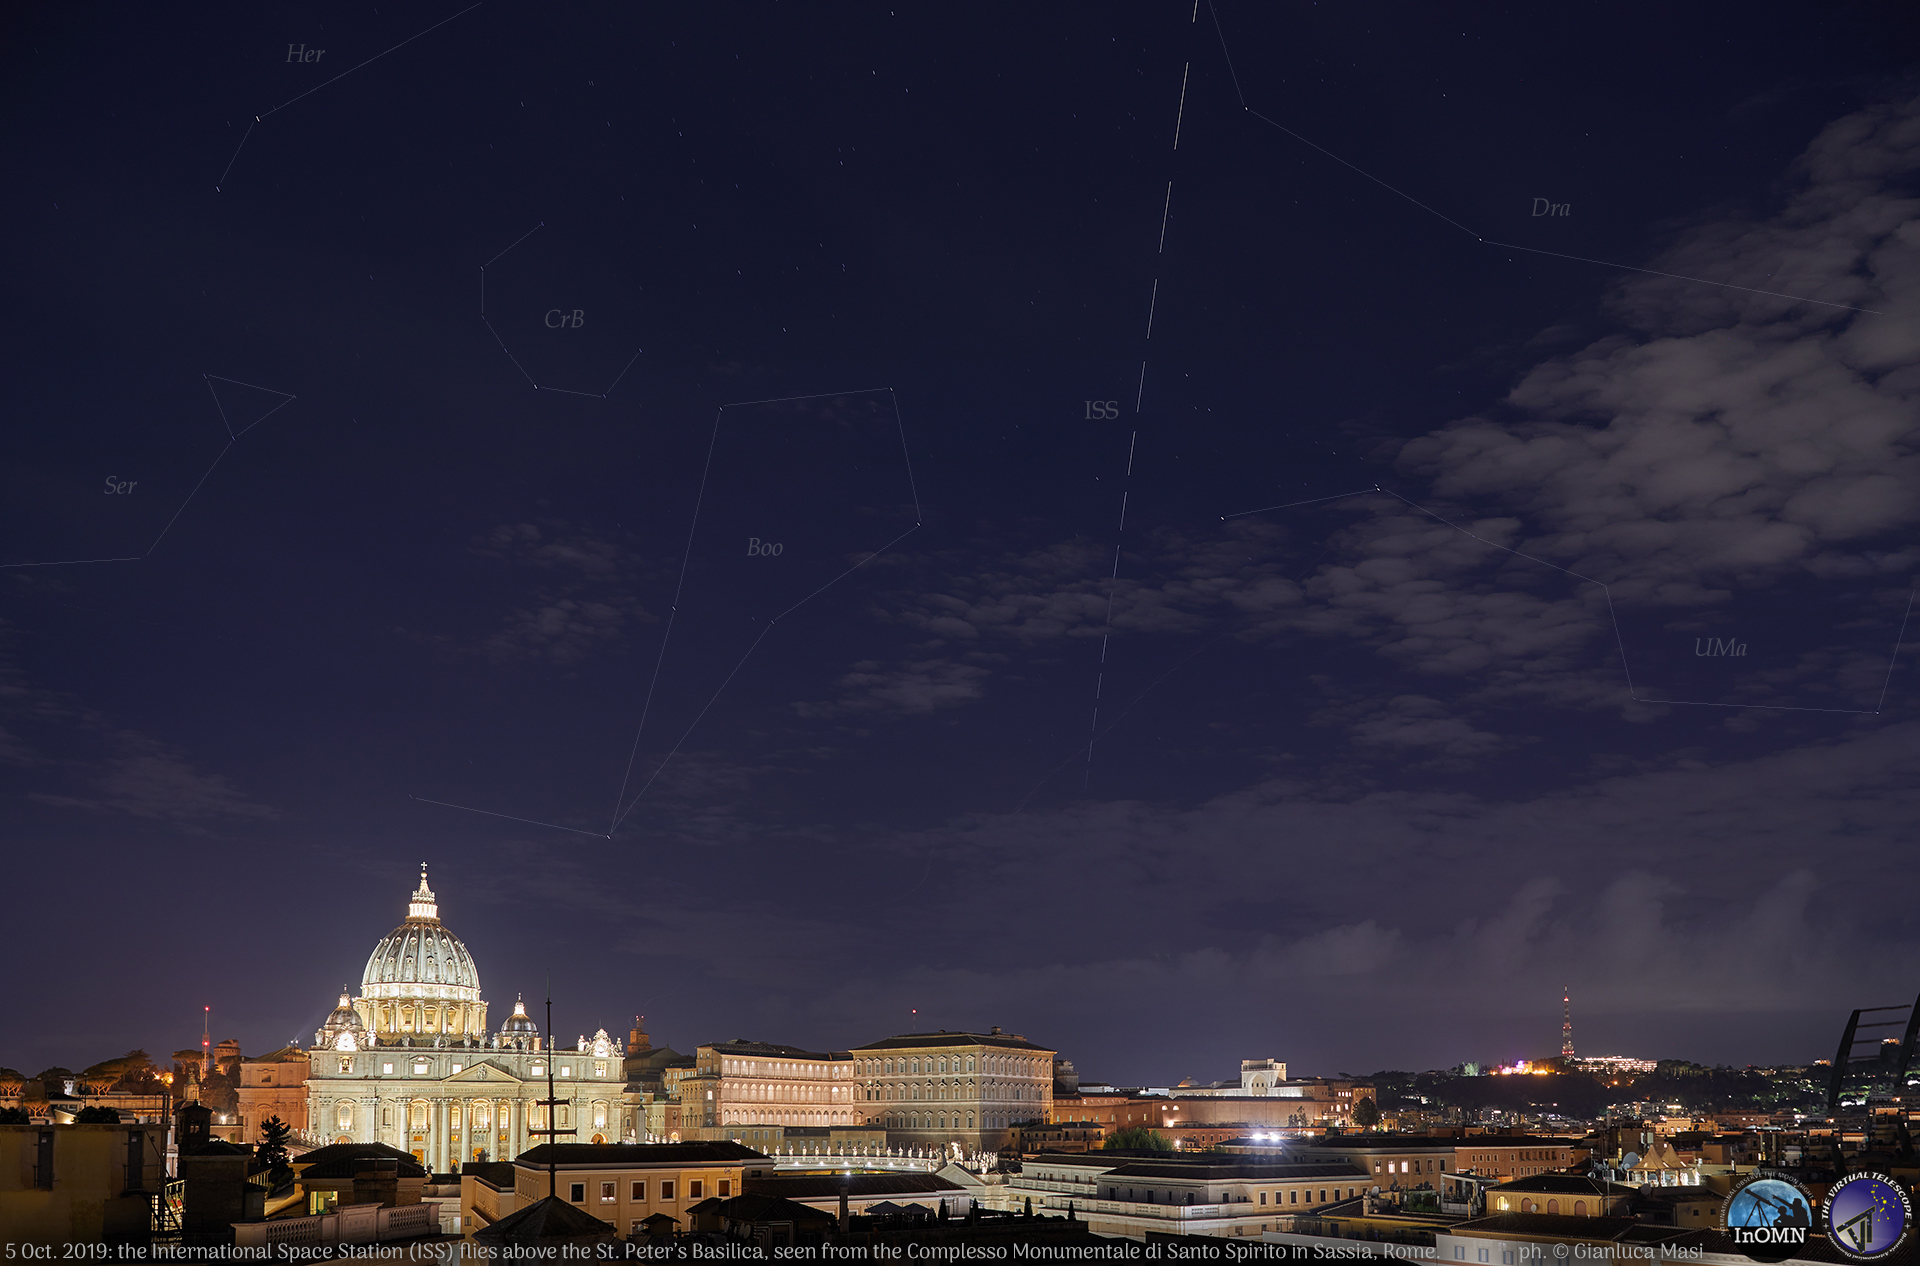 The International Space Station (ISS) flies beside St. Peter's Basilica: perfect conclusion for the InOMN.